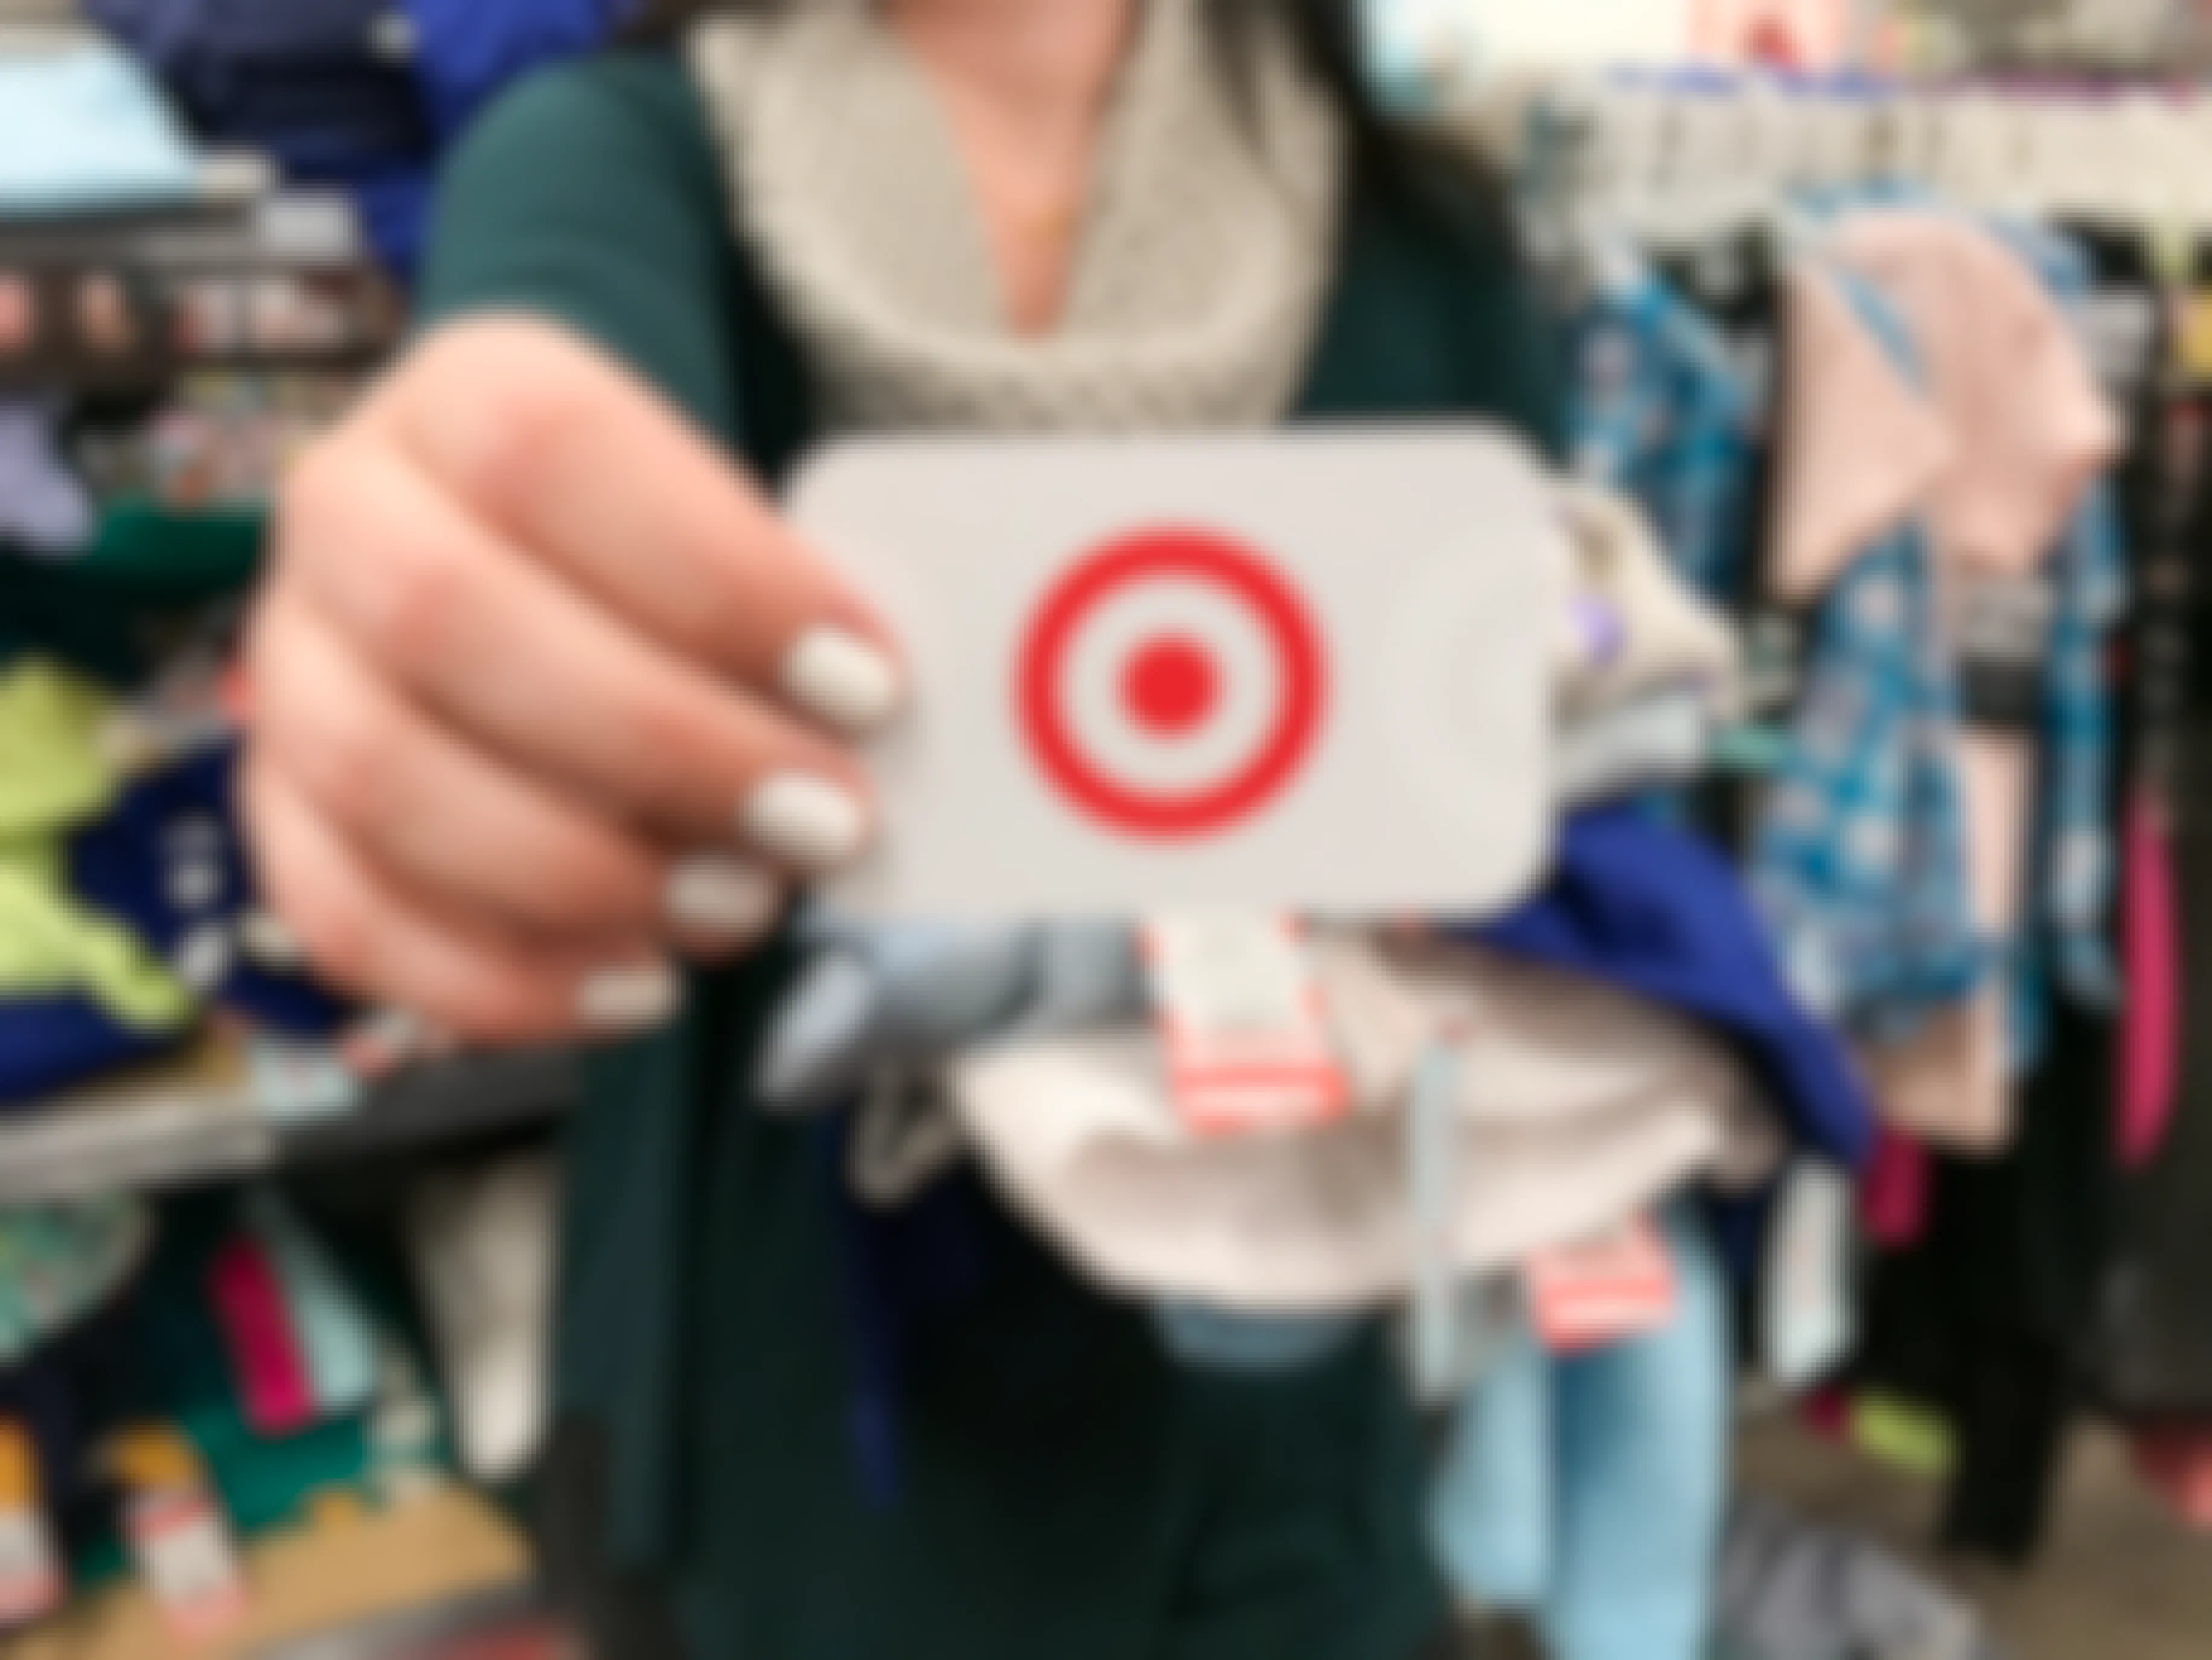 Grab Free Target Gift Cards With These 5 Tips